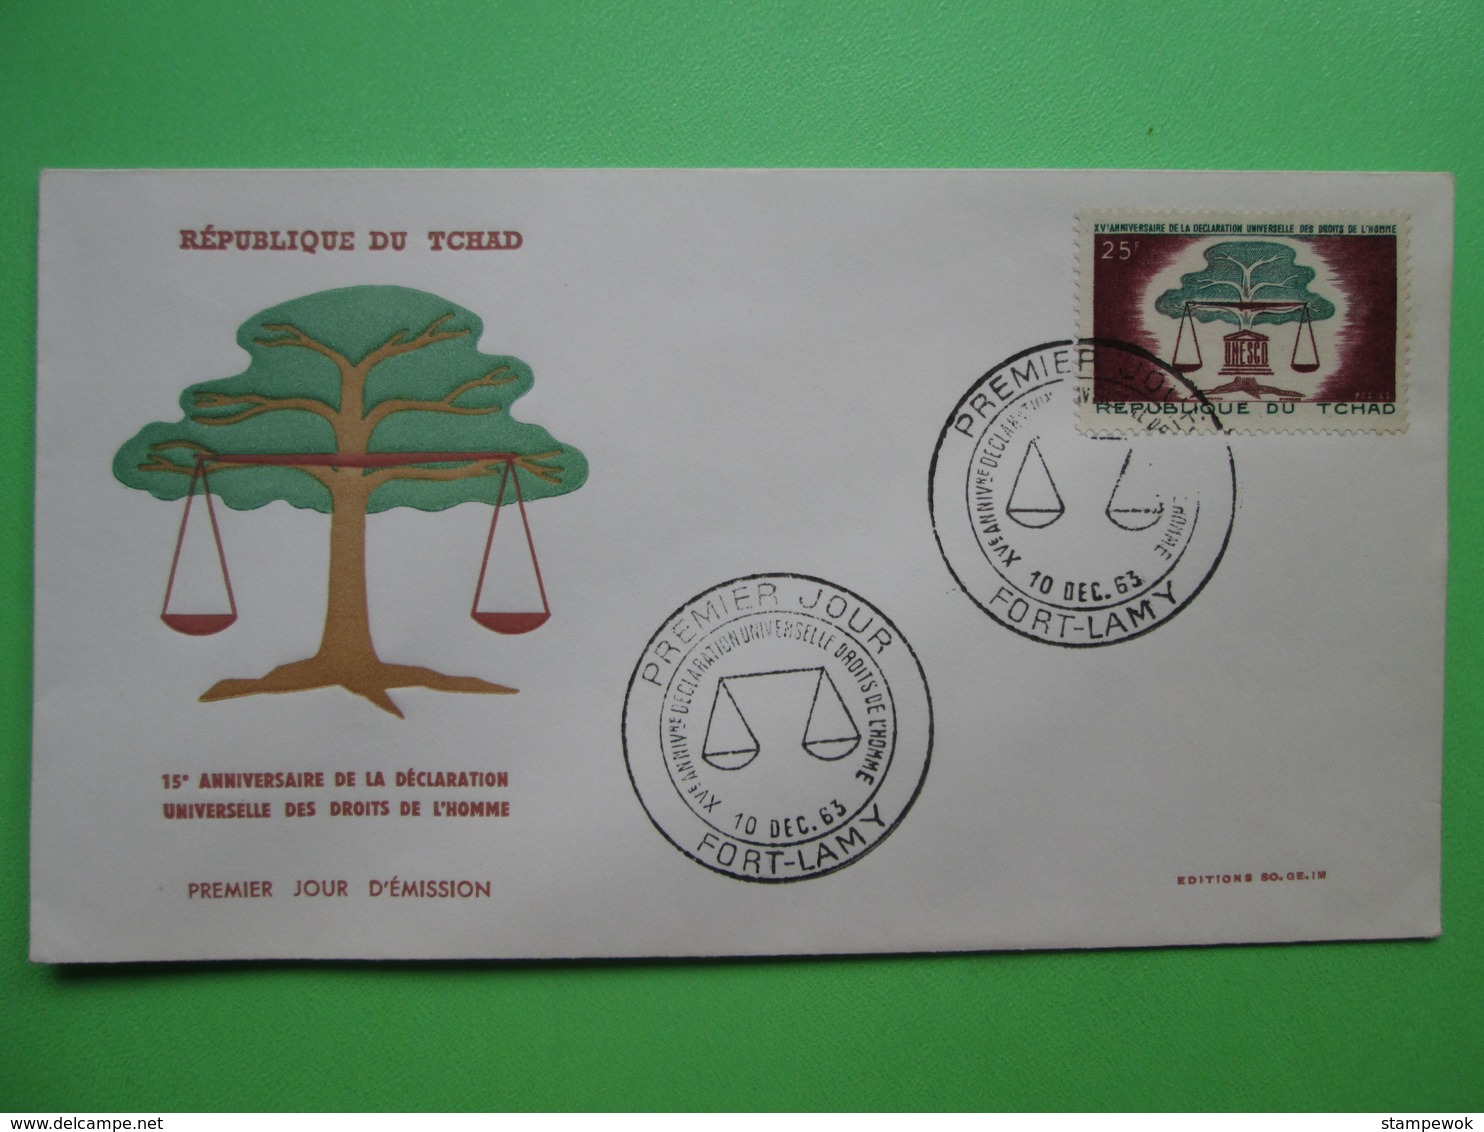 1963 Joint C.A.R./ Chad / Congo / Gabon - Declaration Of Human Rights 15th Anniv. - Chad FDC - Joint Issues